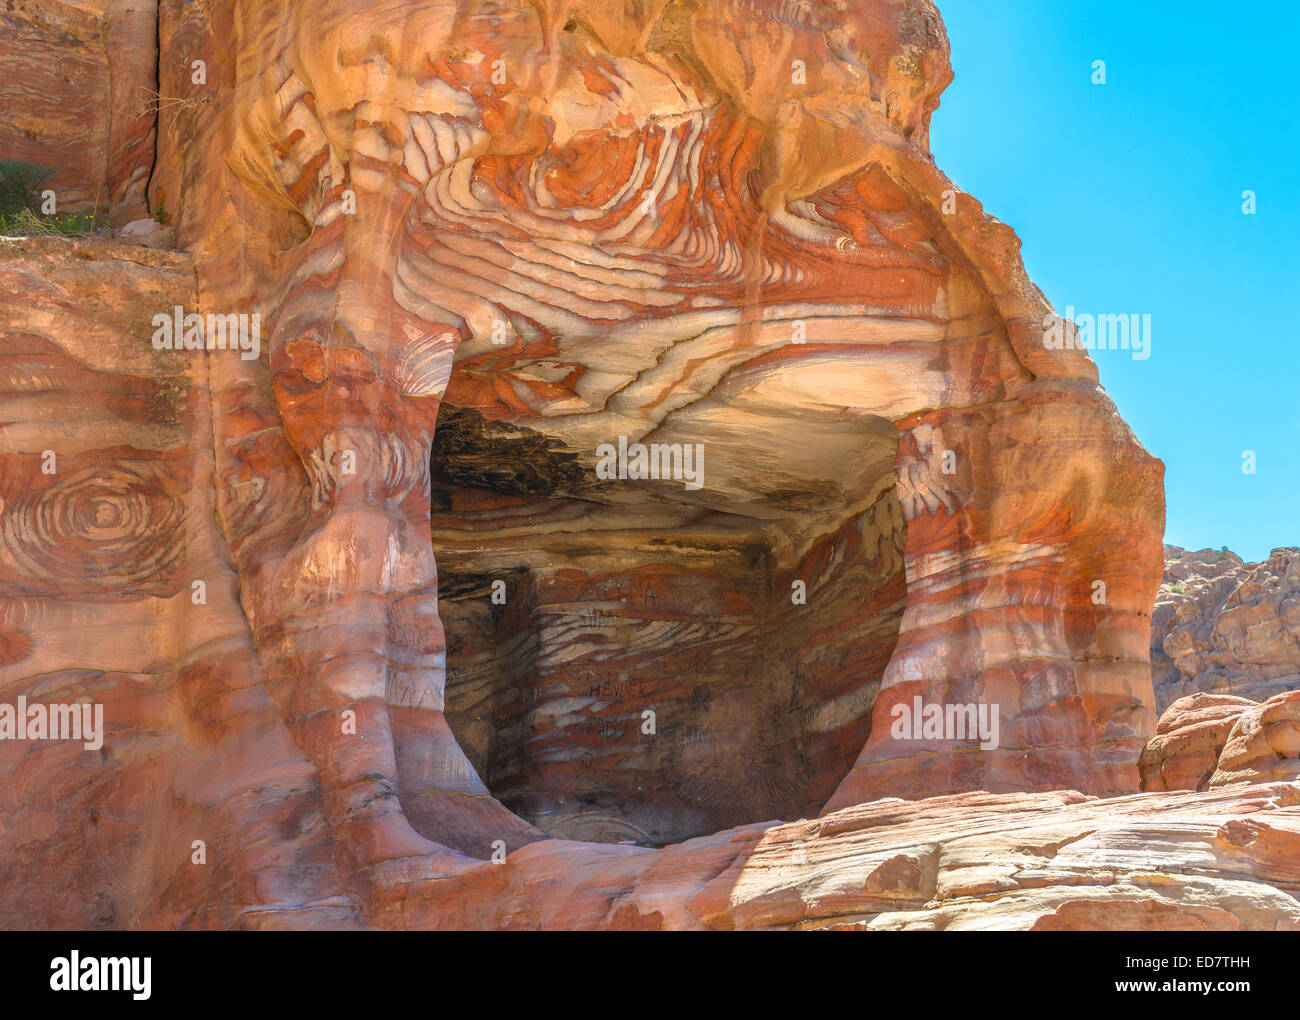 Rock formations in ancient Nabataeans town Petra in Jordan, Middle East. Stock Photo